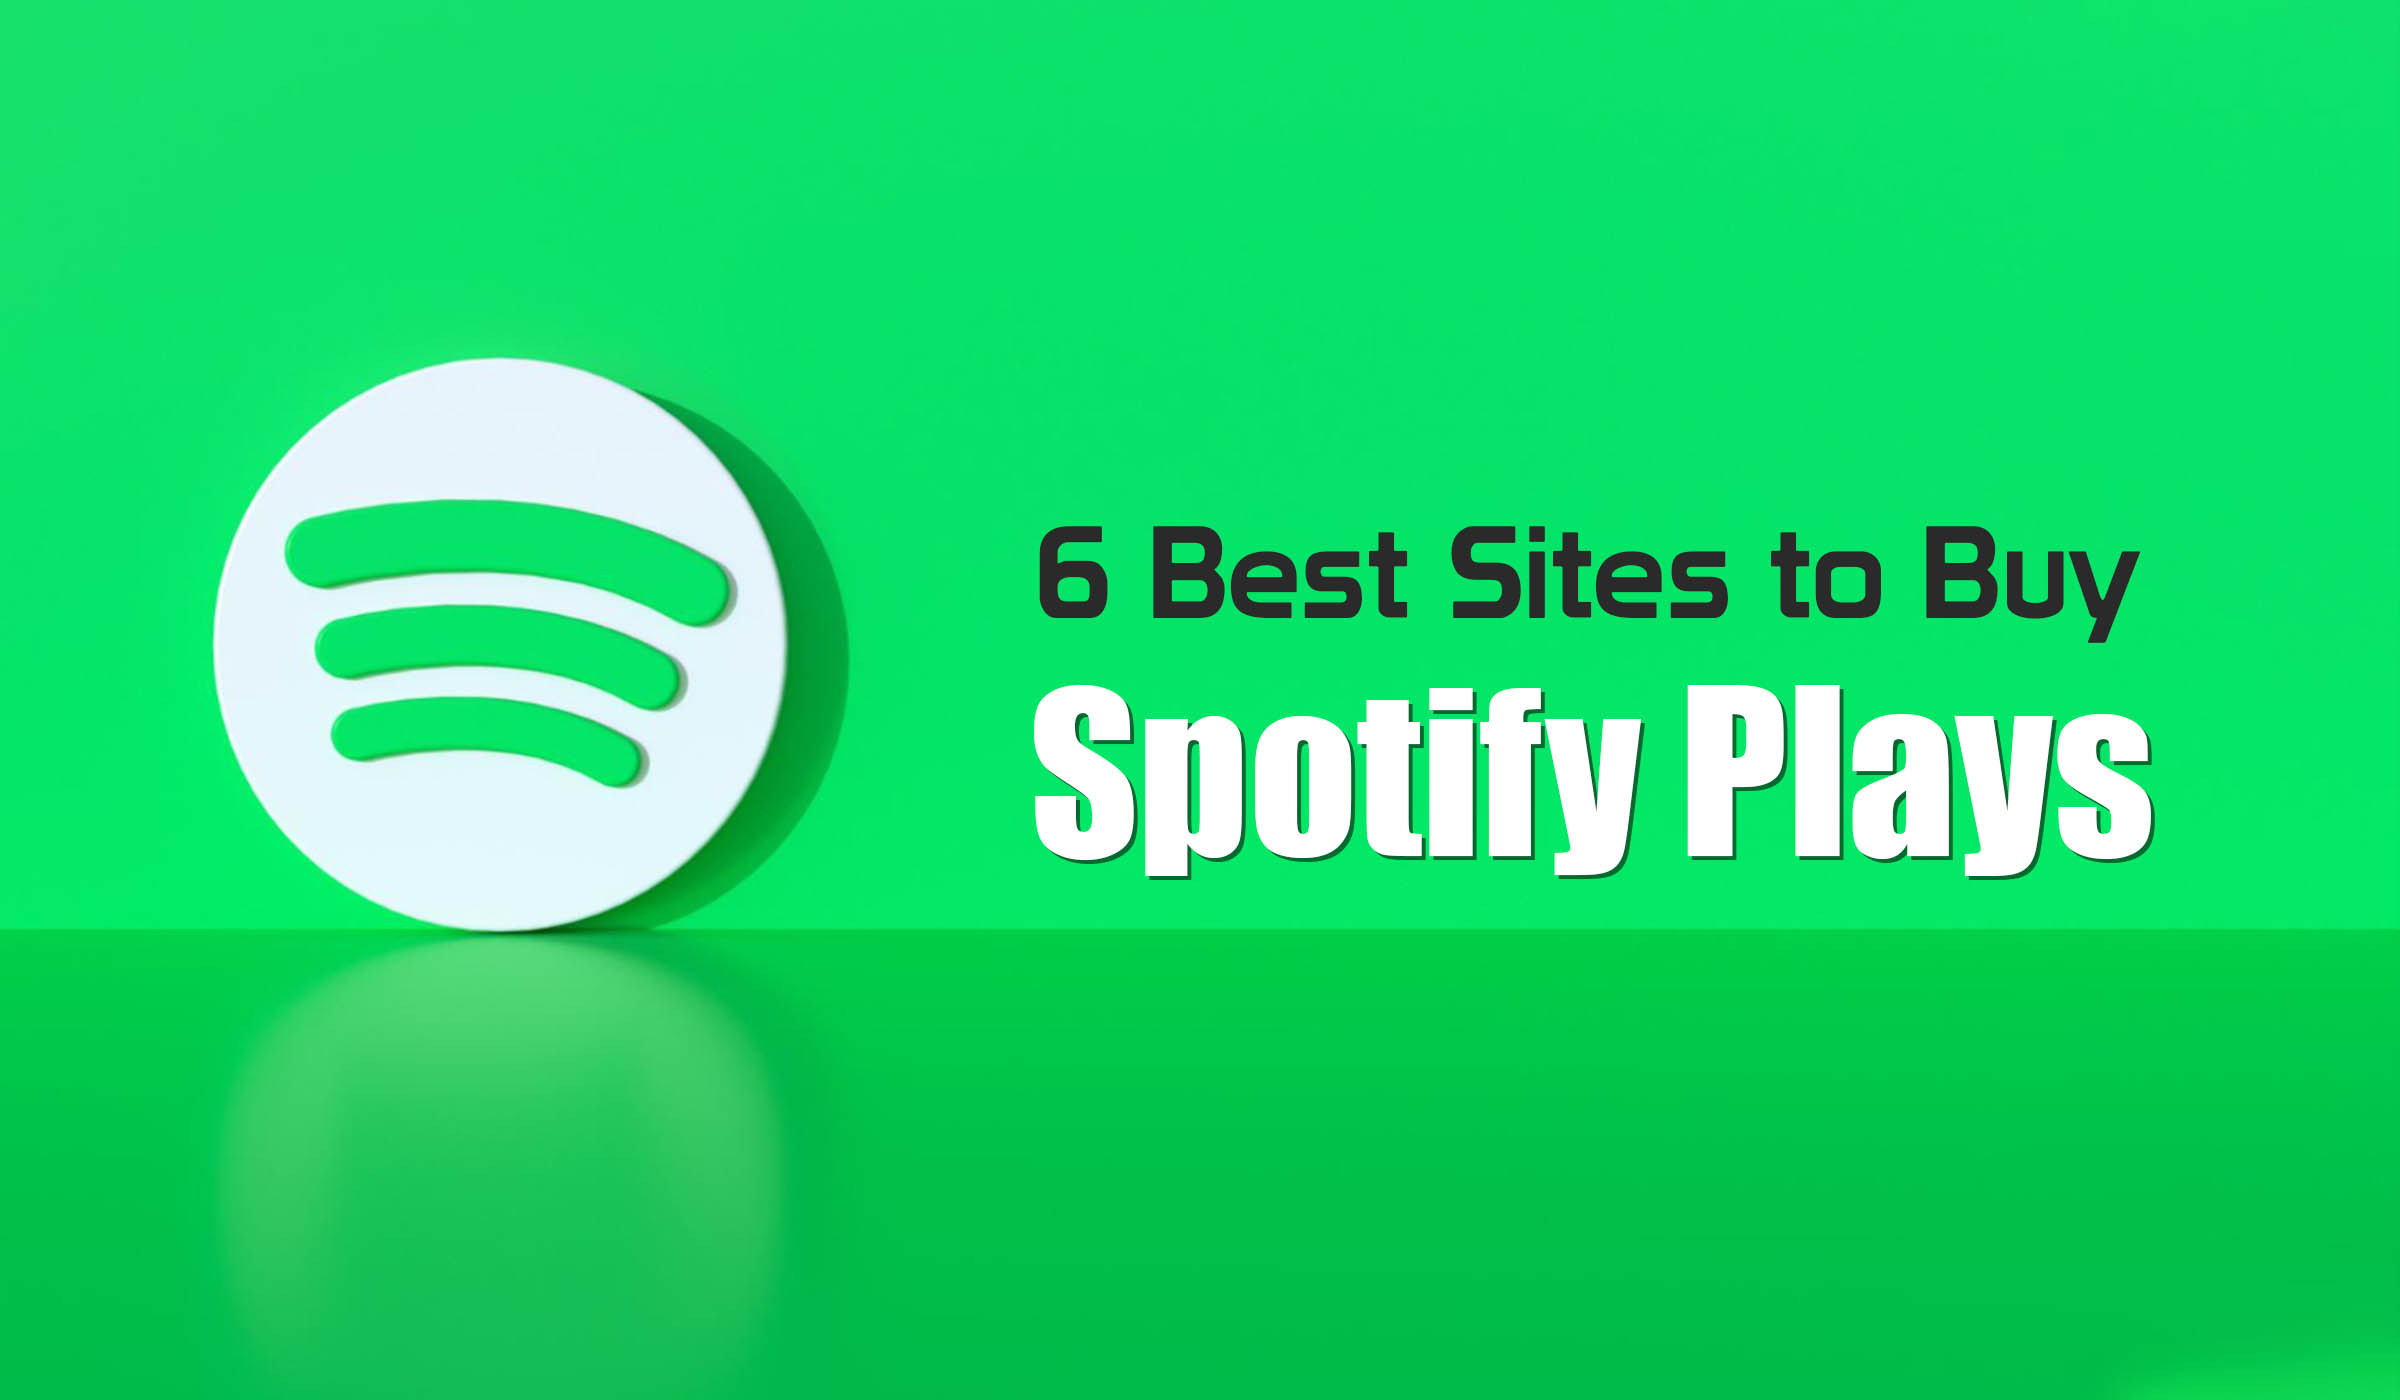 Best Sites to Buy Spotify Plays